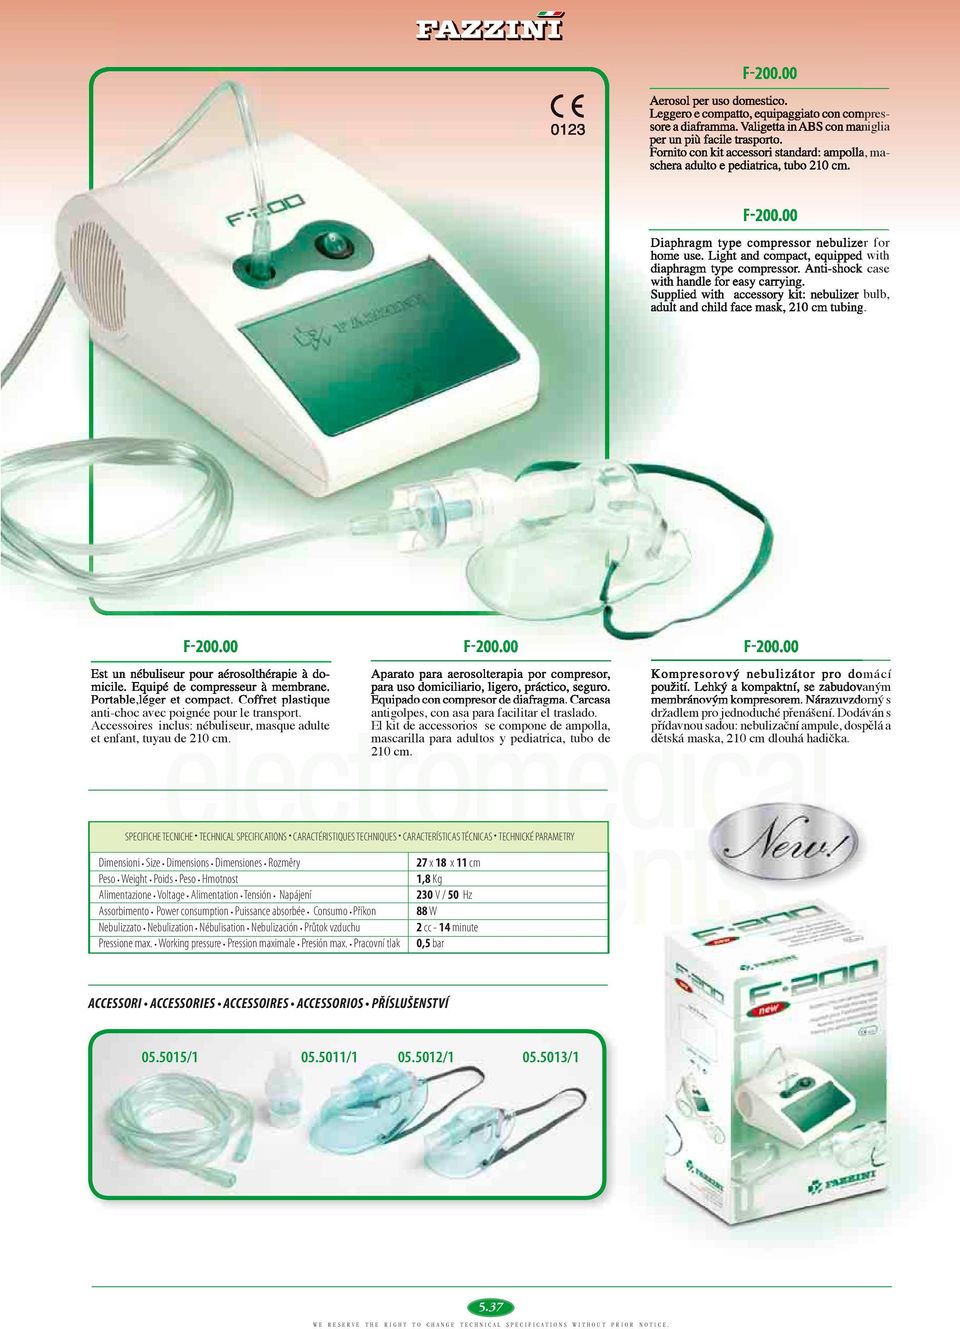 Light and compact, equipped with diaphragm type compressor. Anti-shock case with handle for easy carrying. Supplied with accessory kit: nebulizer bulb, adult and child face mask, 210 cm tubing. F-200.